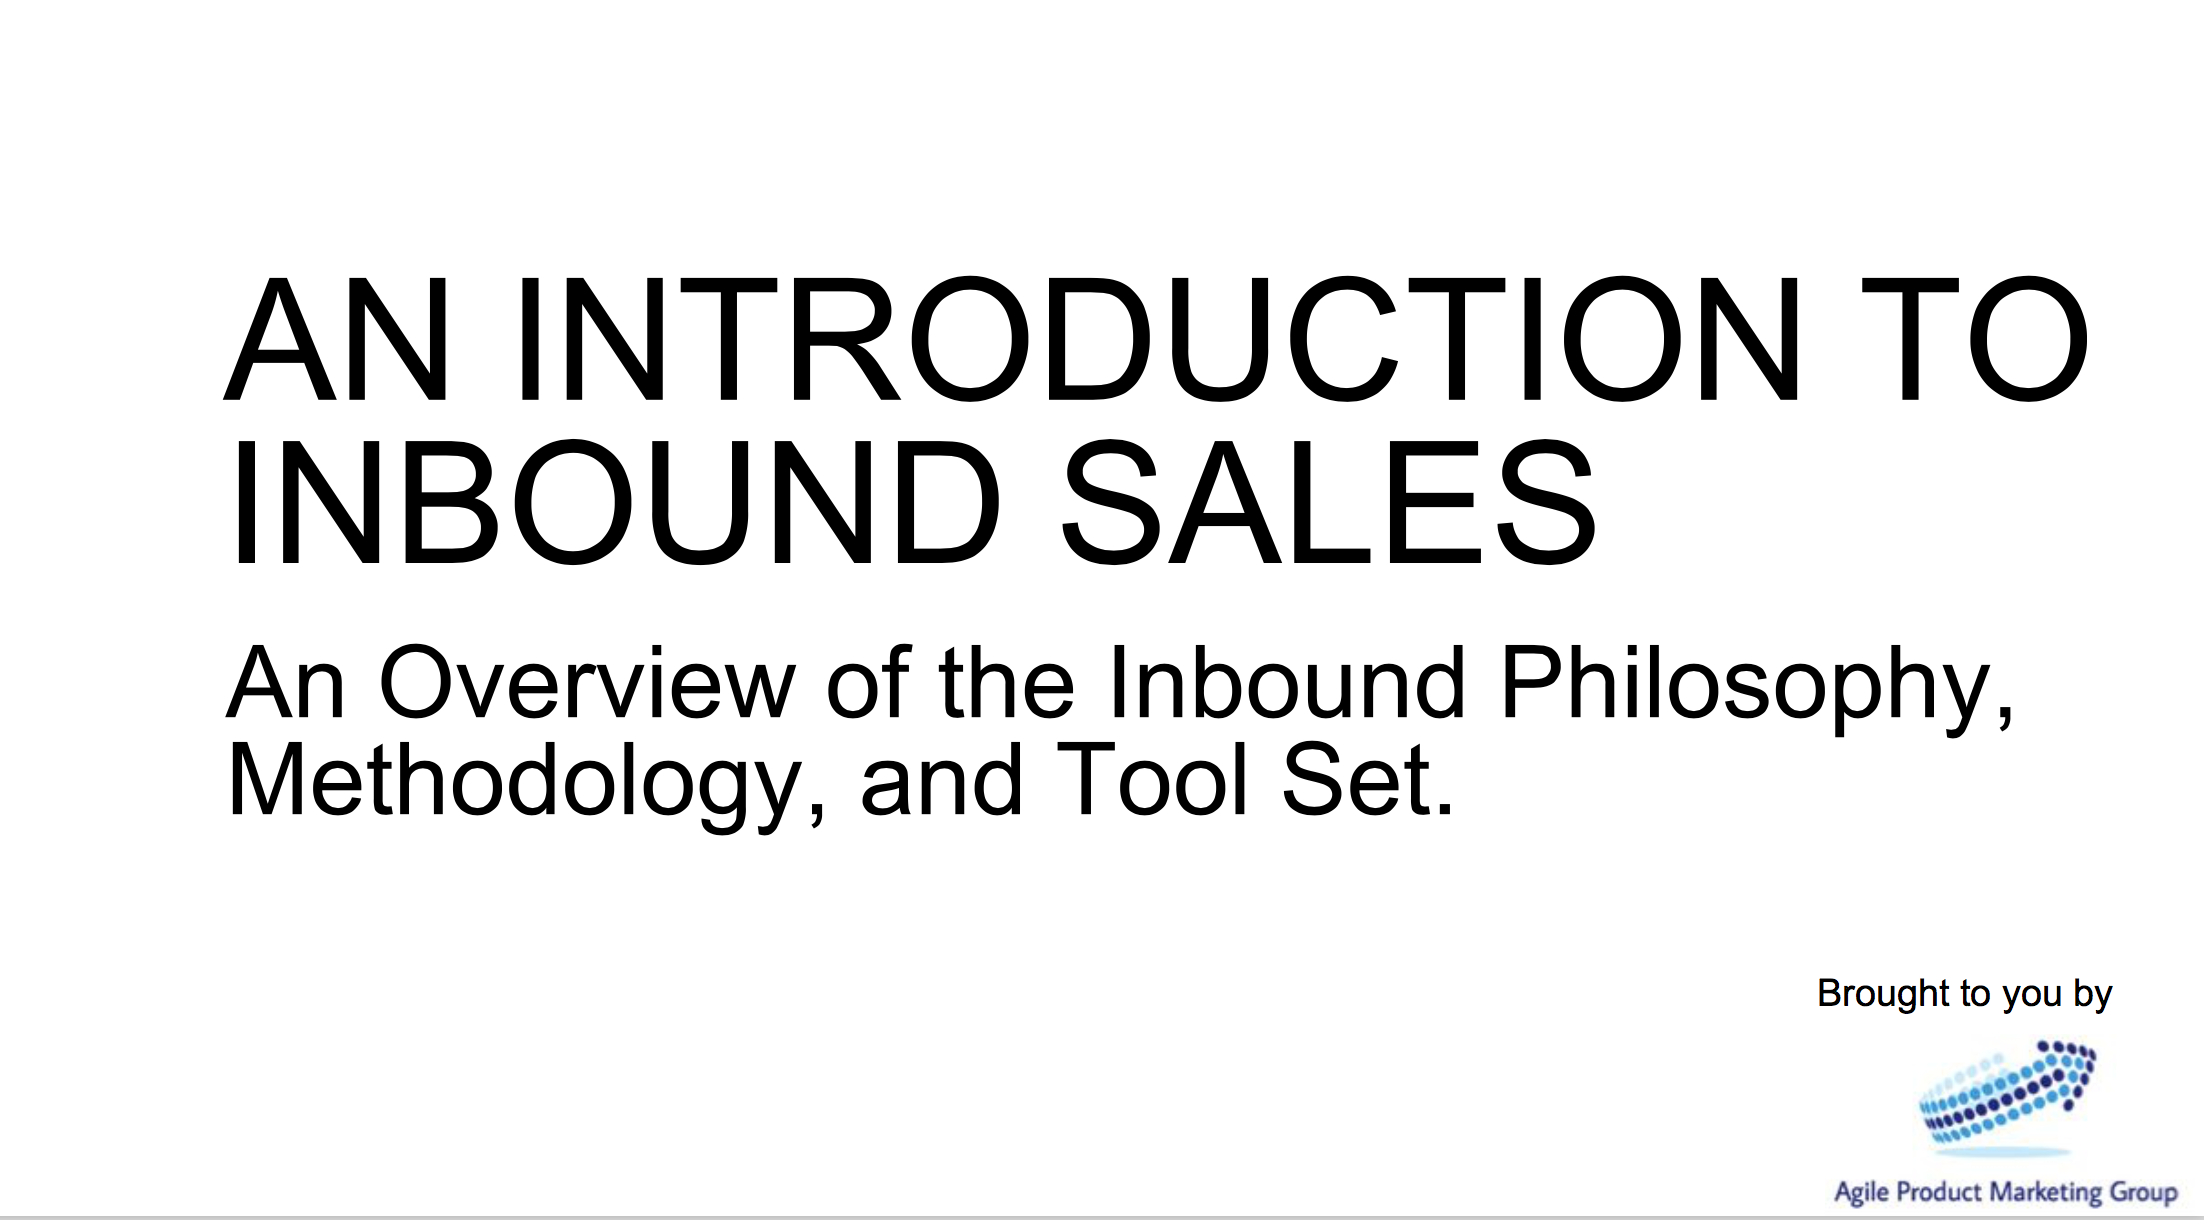 An Introduction to Inbound Sales (cover).png